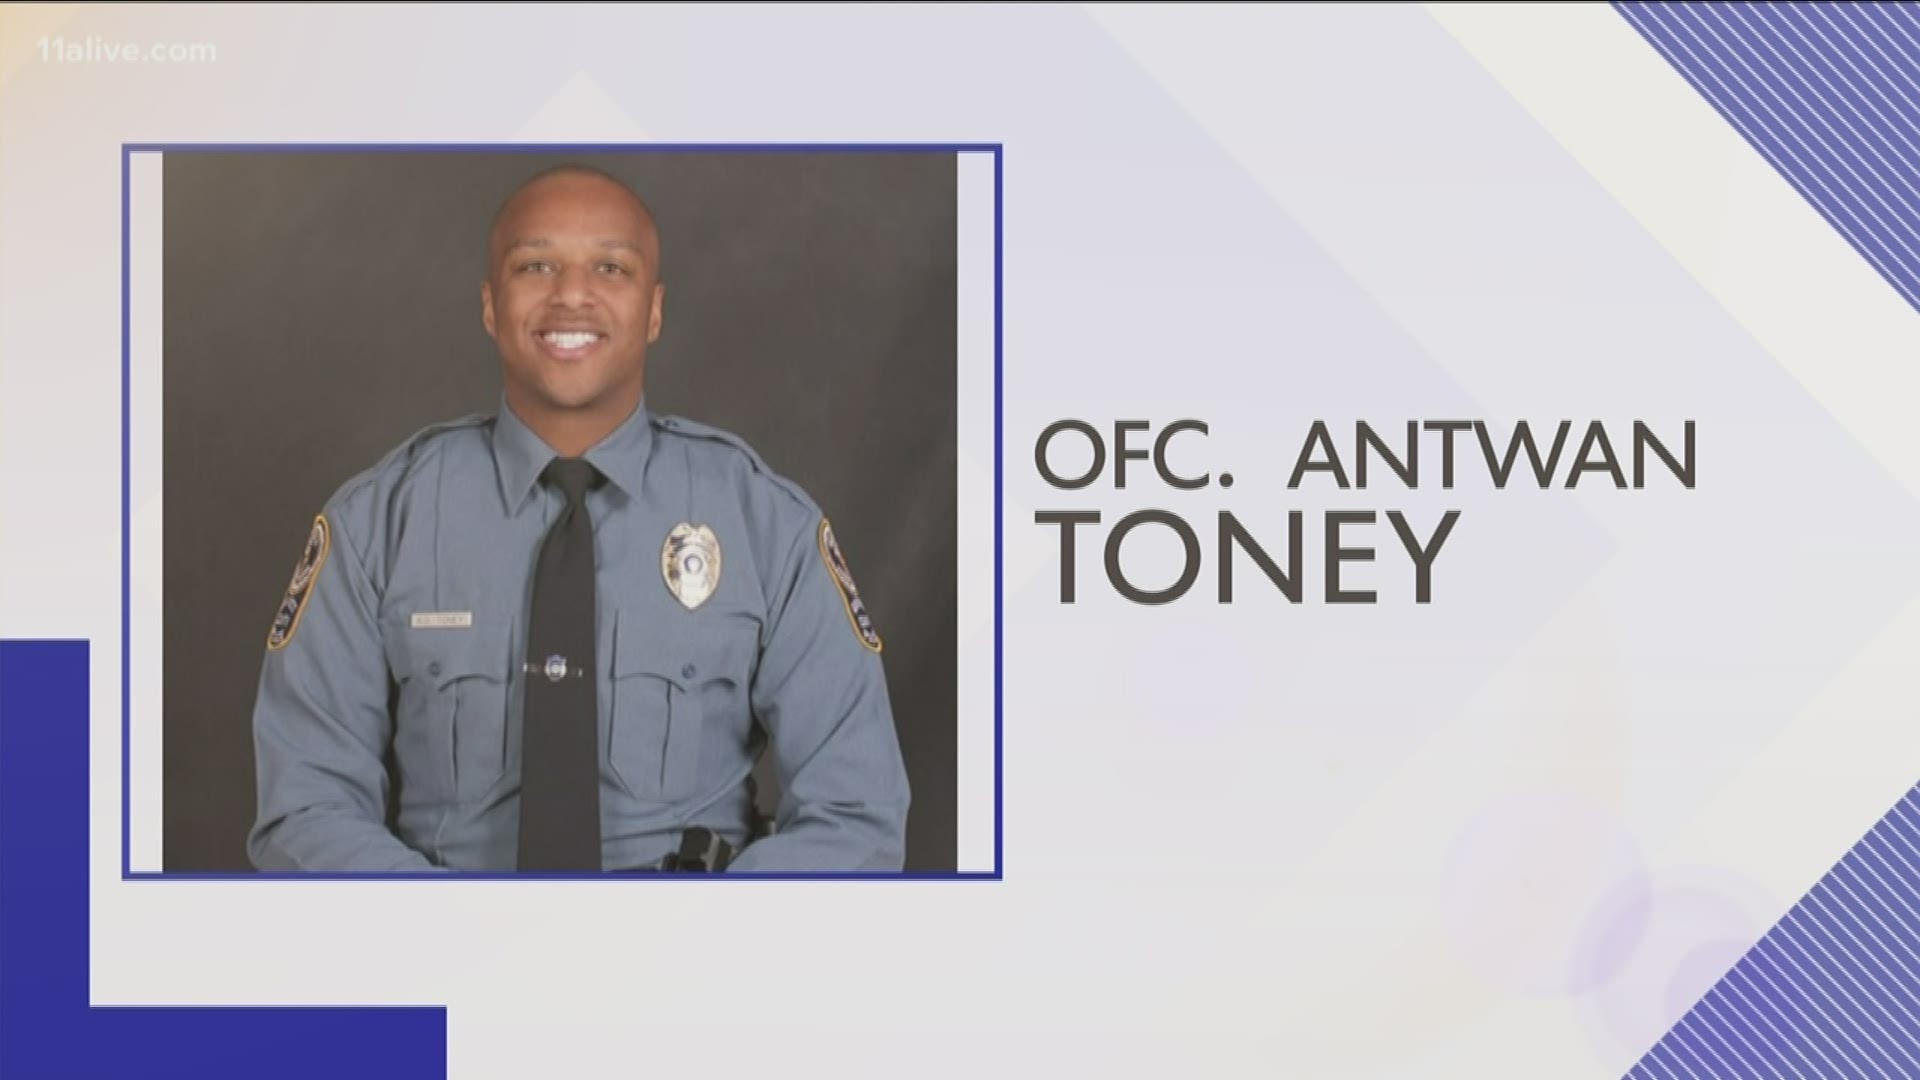 Oct. 20 marks one year since Gwinnett Police Officer Antwan Toney was shot and killed.